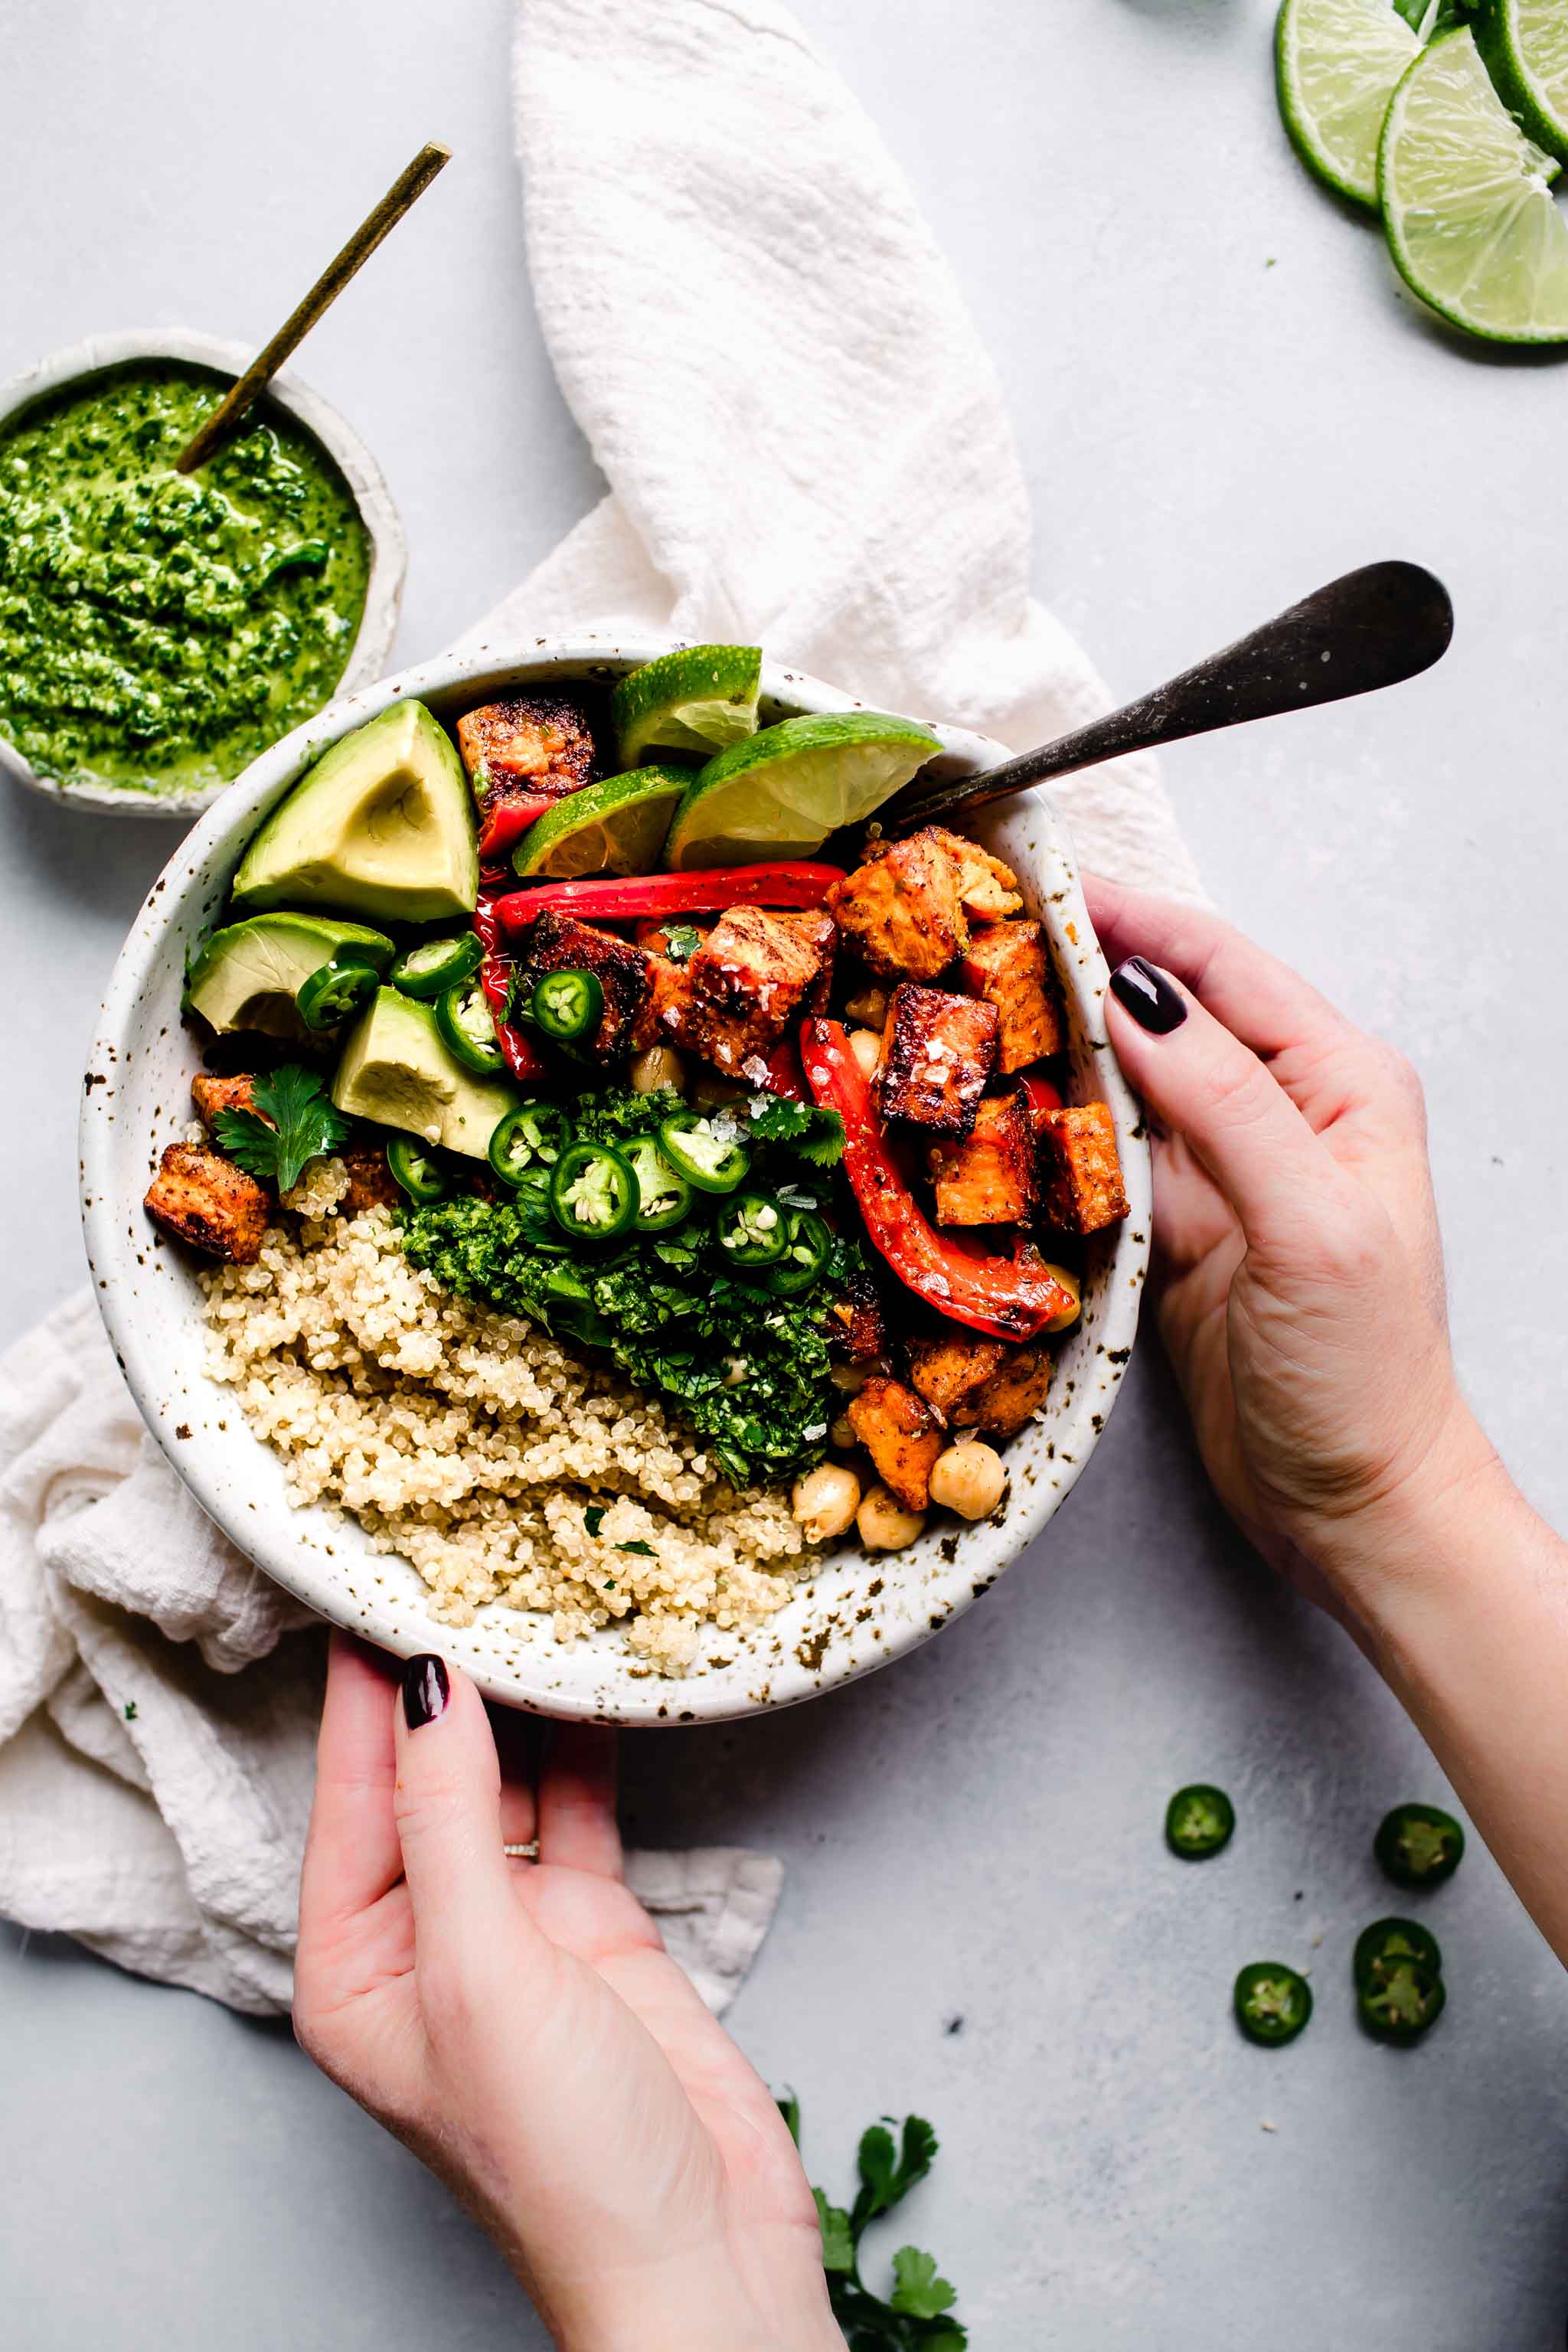 Two hands holding bowl of quinoa topped with peppers, sweet potatoes, chickpeas, avocado and drizzled with mojo sauce.